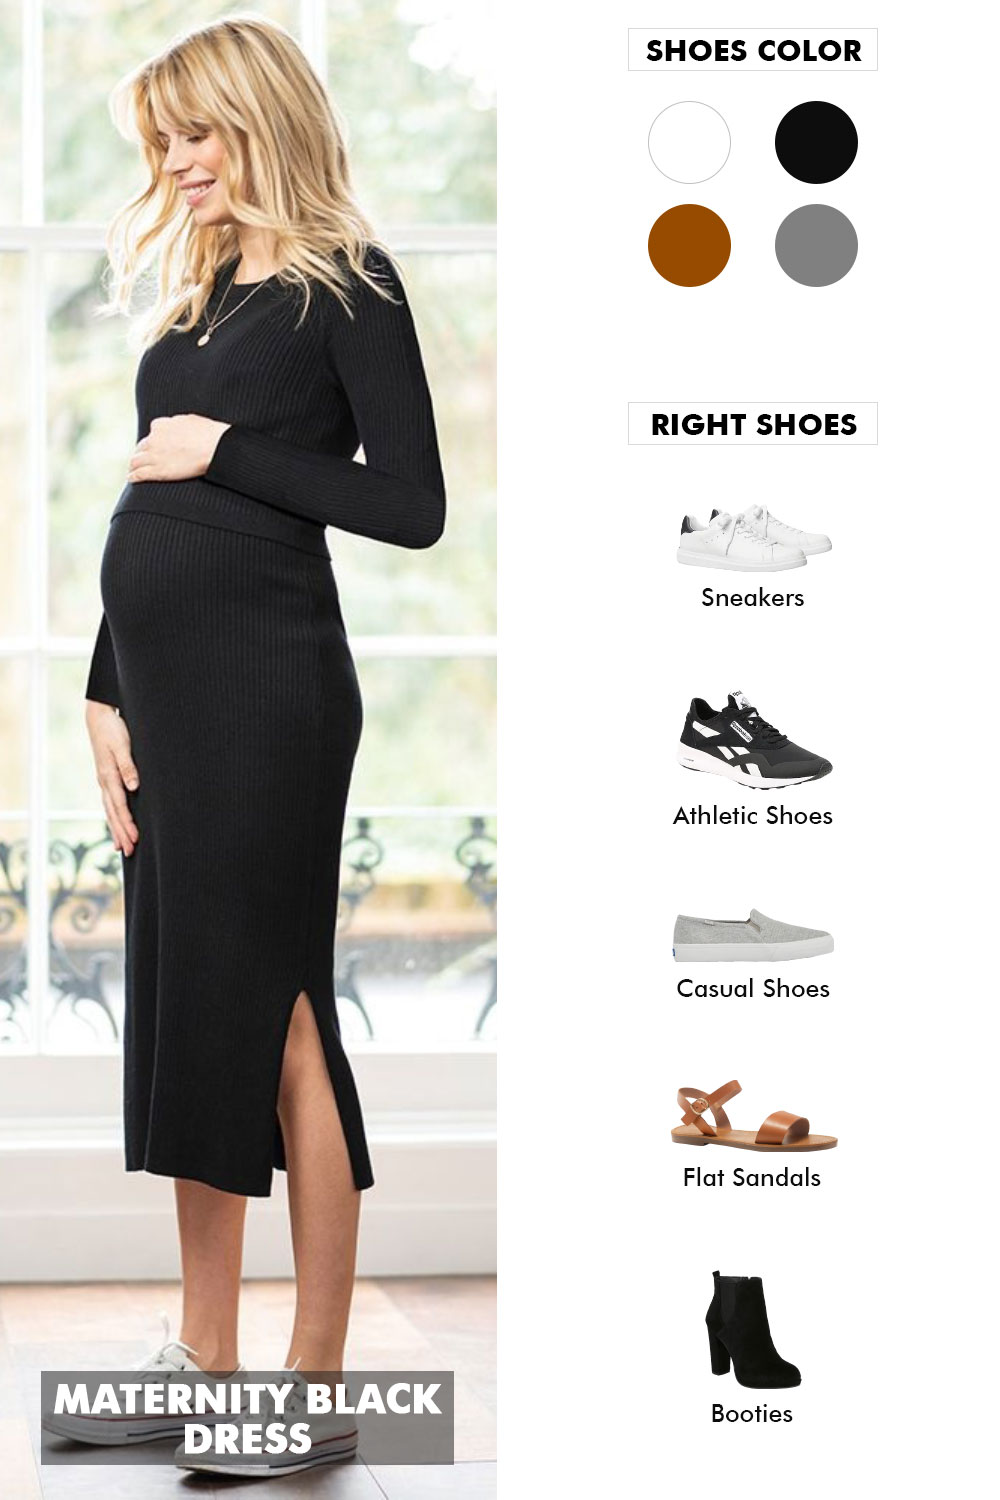 brown shoes with black dress